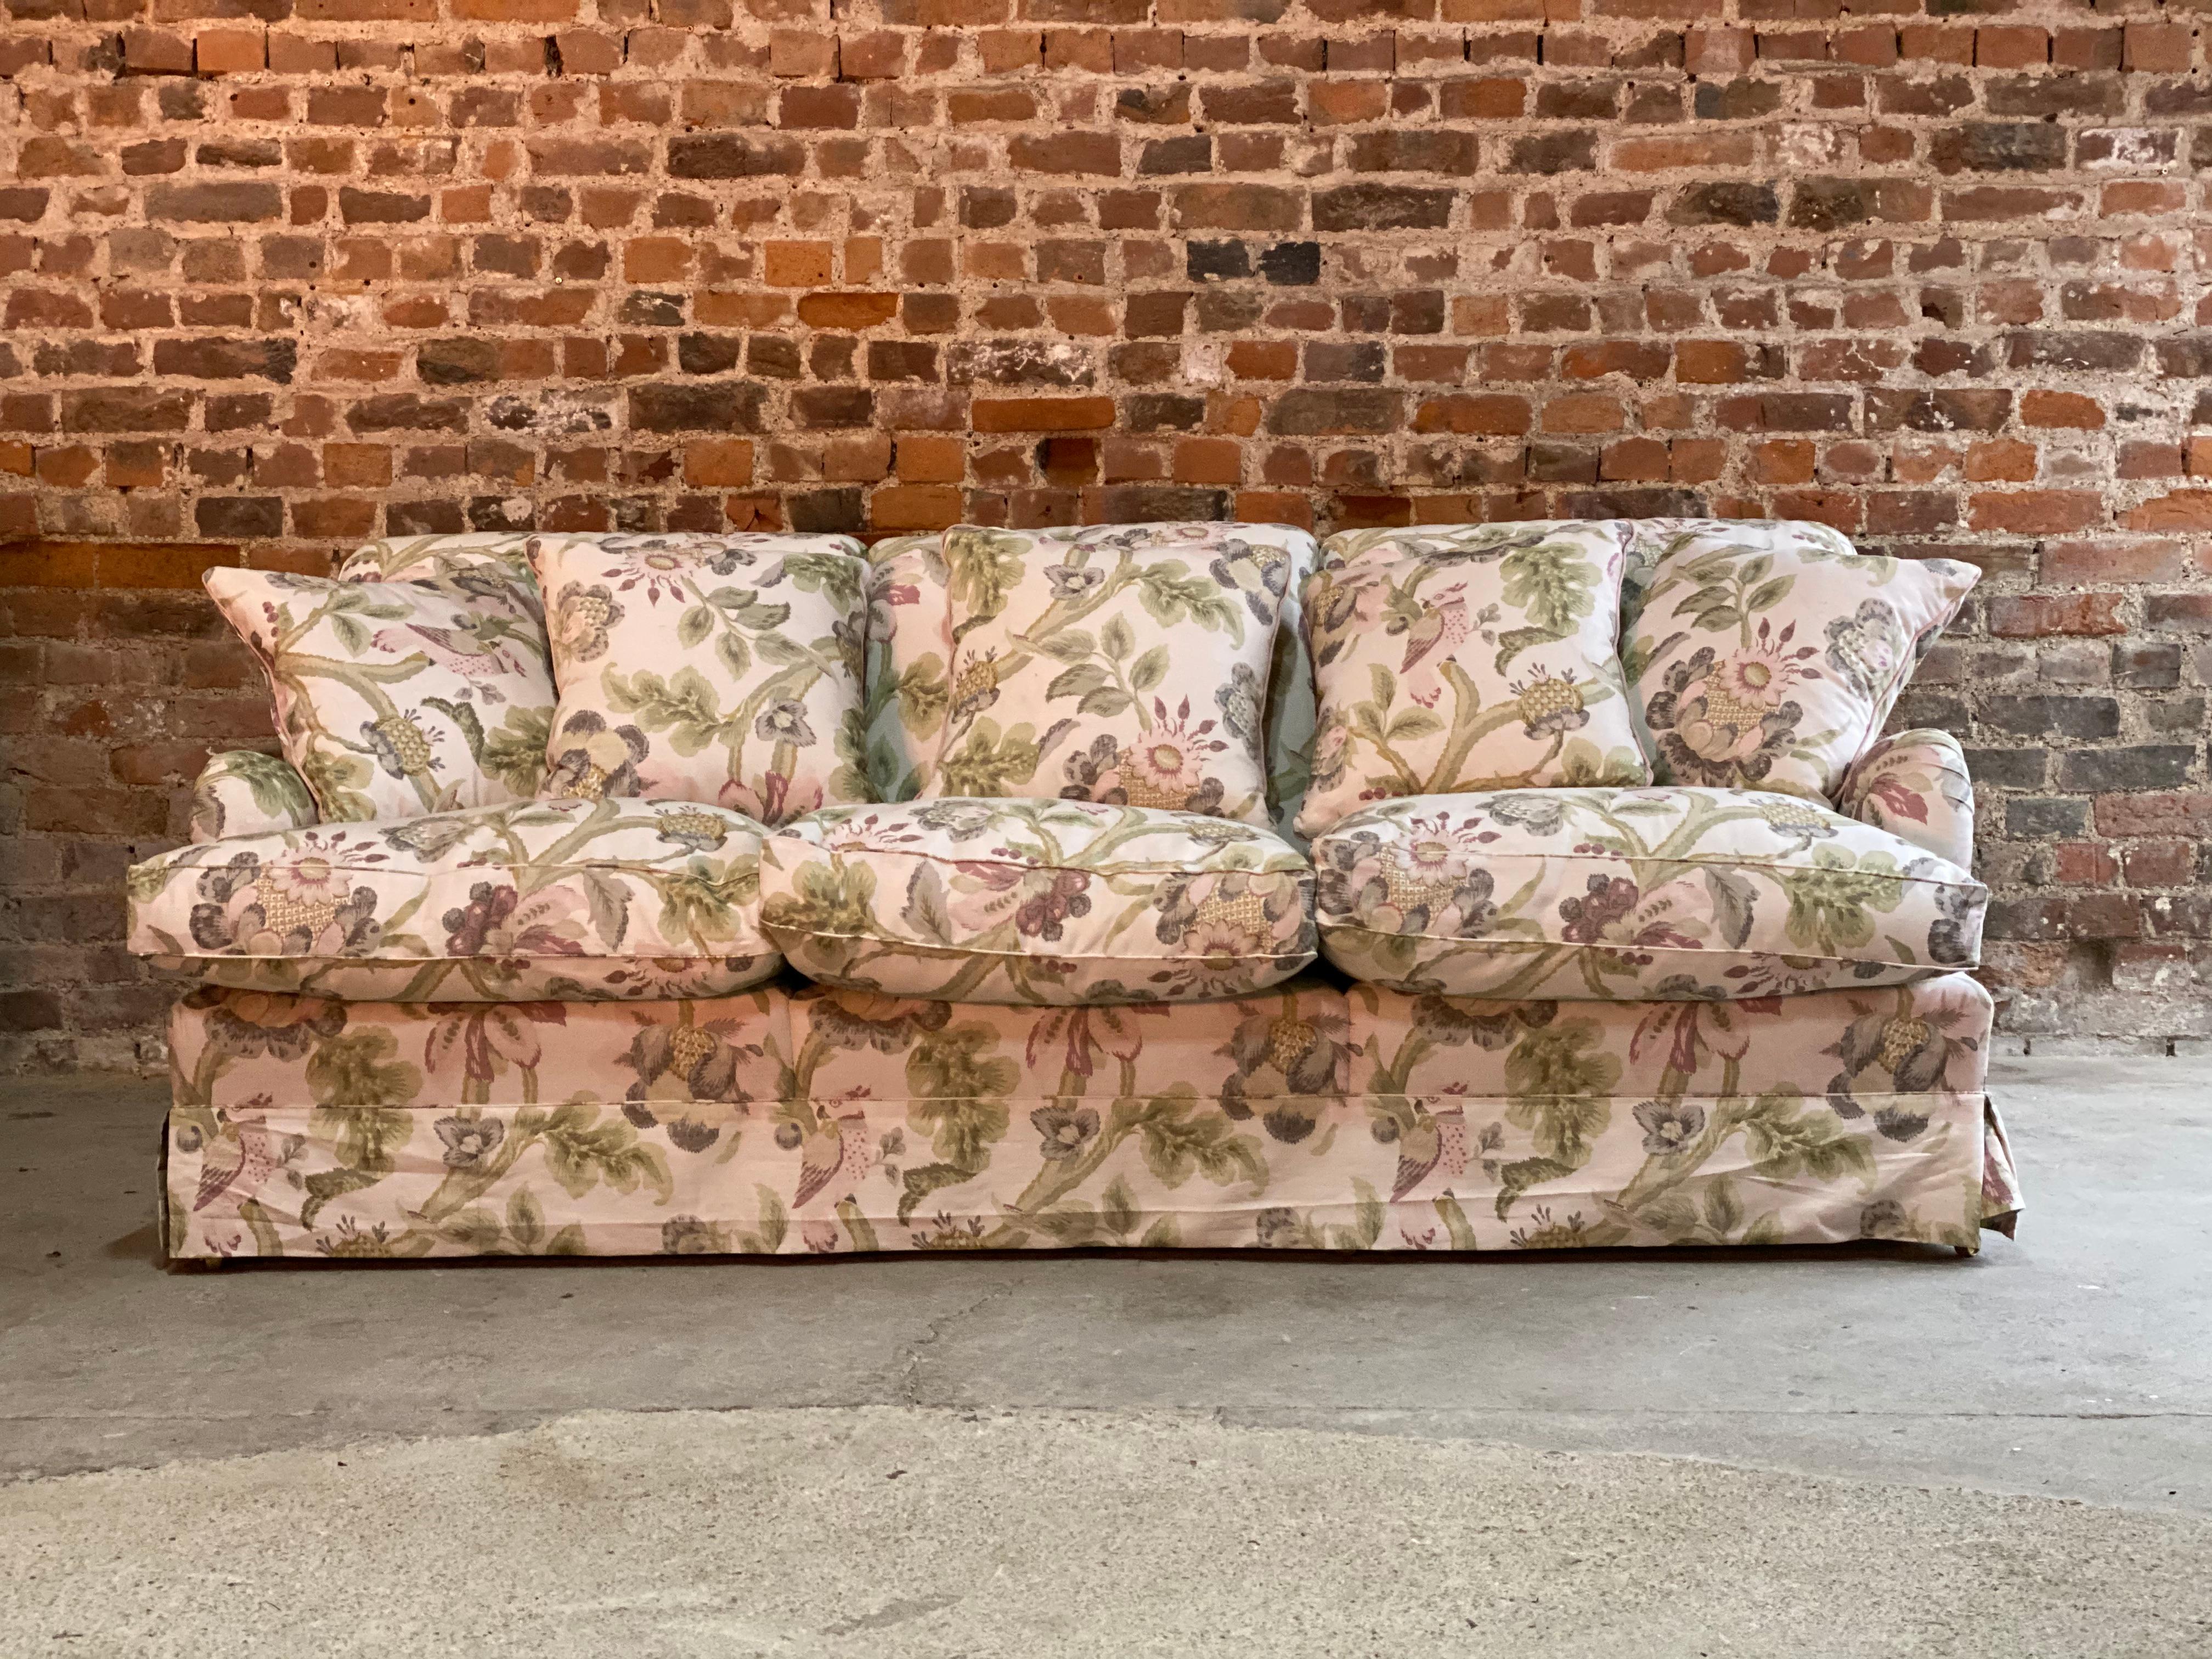 Howard & Sons Bridgewater sofa deep seated loose cushion bespoke 2014 number 3

Howard & Sons loose cushion deep seated Bridgewater sofa labelled to underside, the sofa is upholstered in floral and bird patterned upholstery, H&S serial number